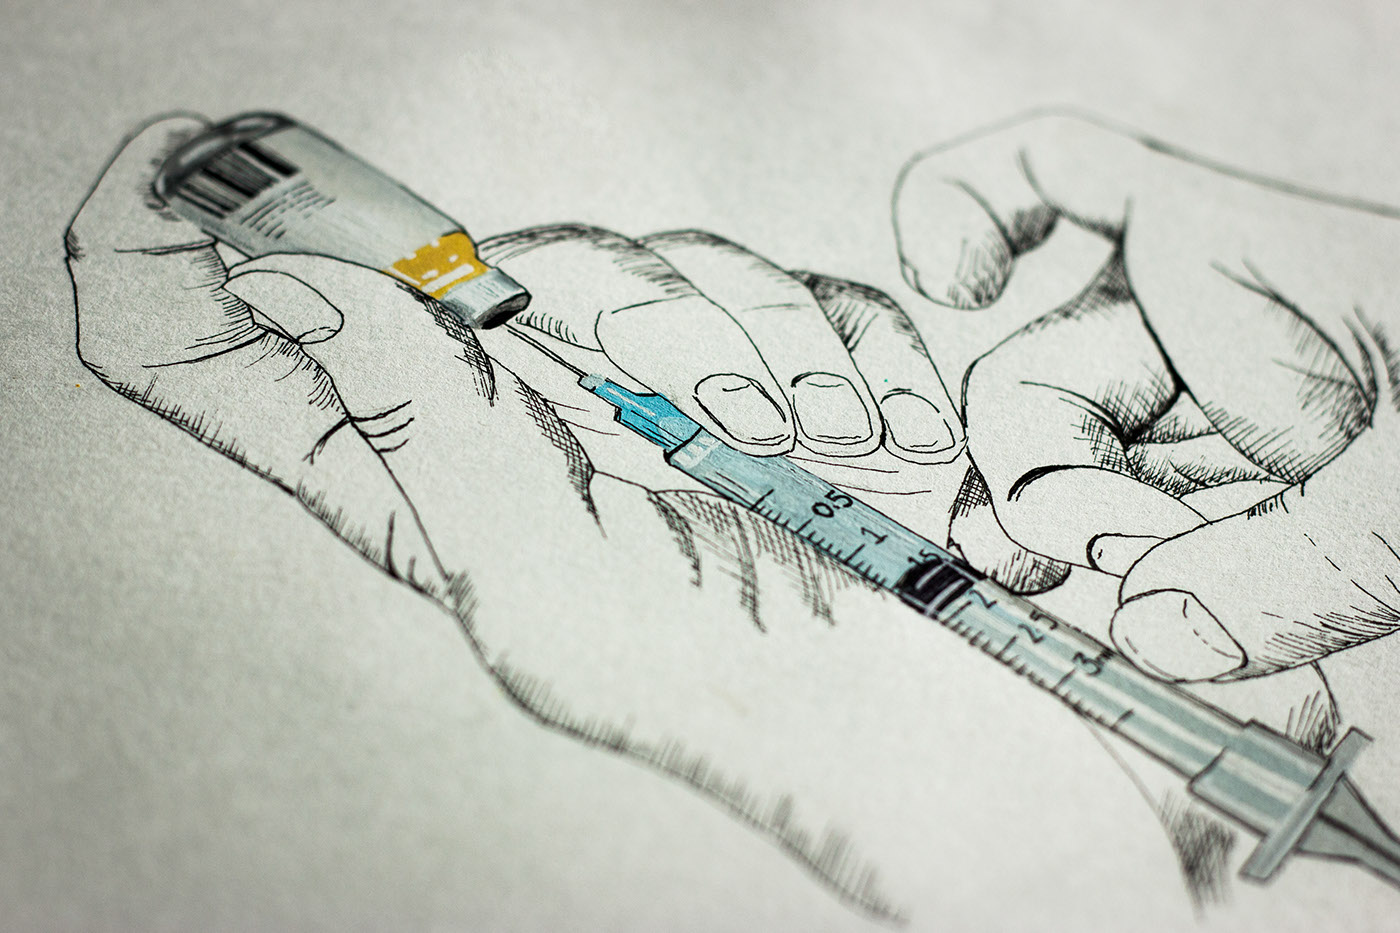 syringe Drugs mosquito media PAPARAZZI pressure women injection medicine pain hands sketch Cat tears